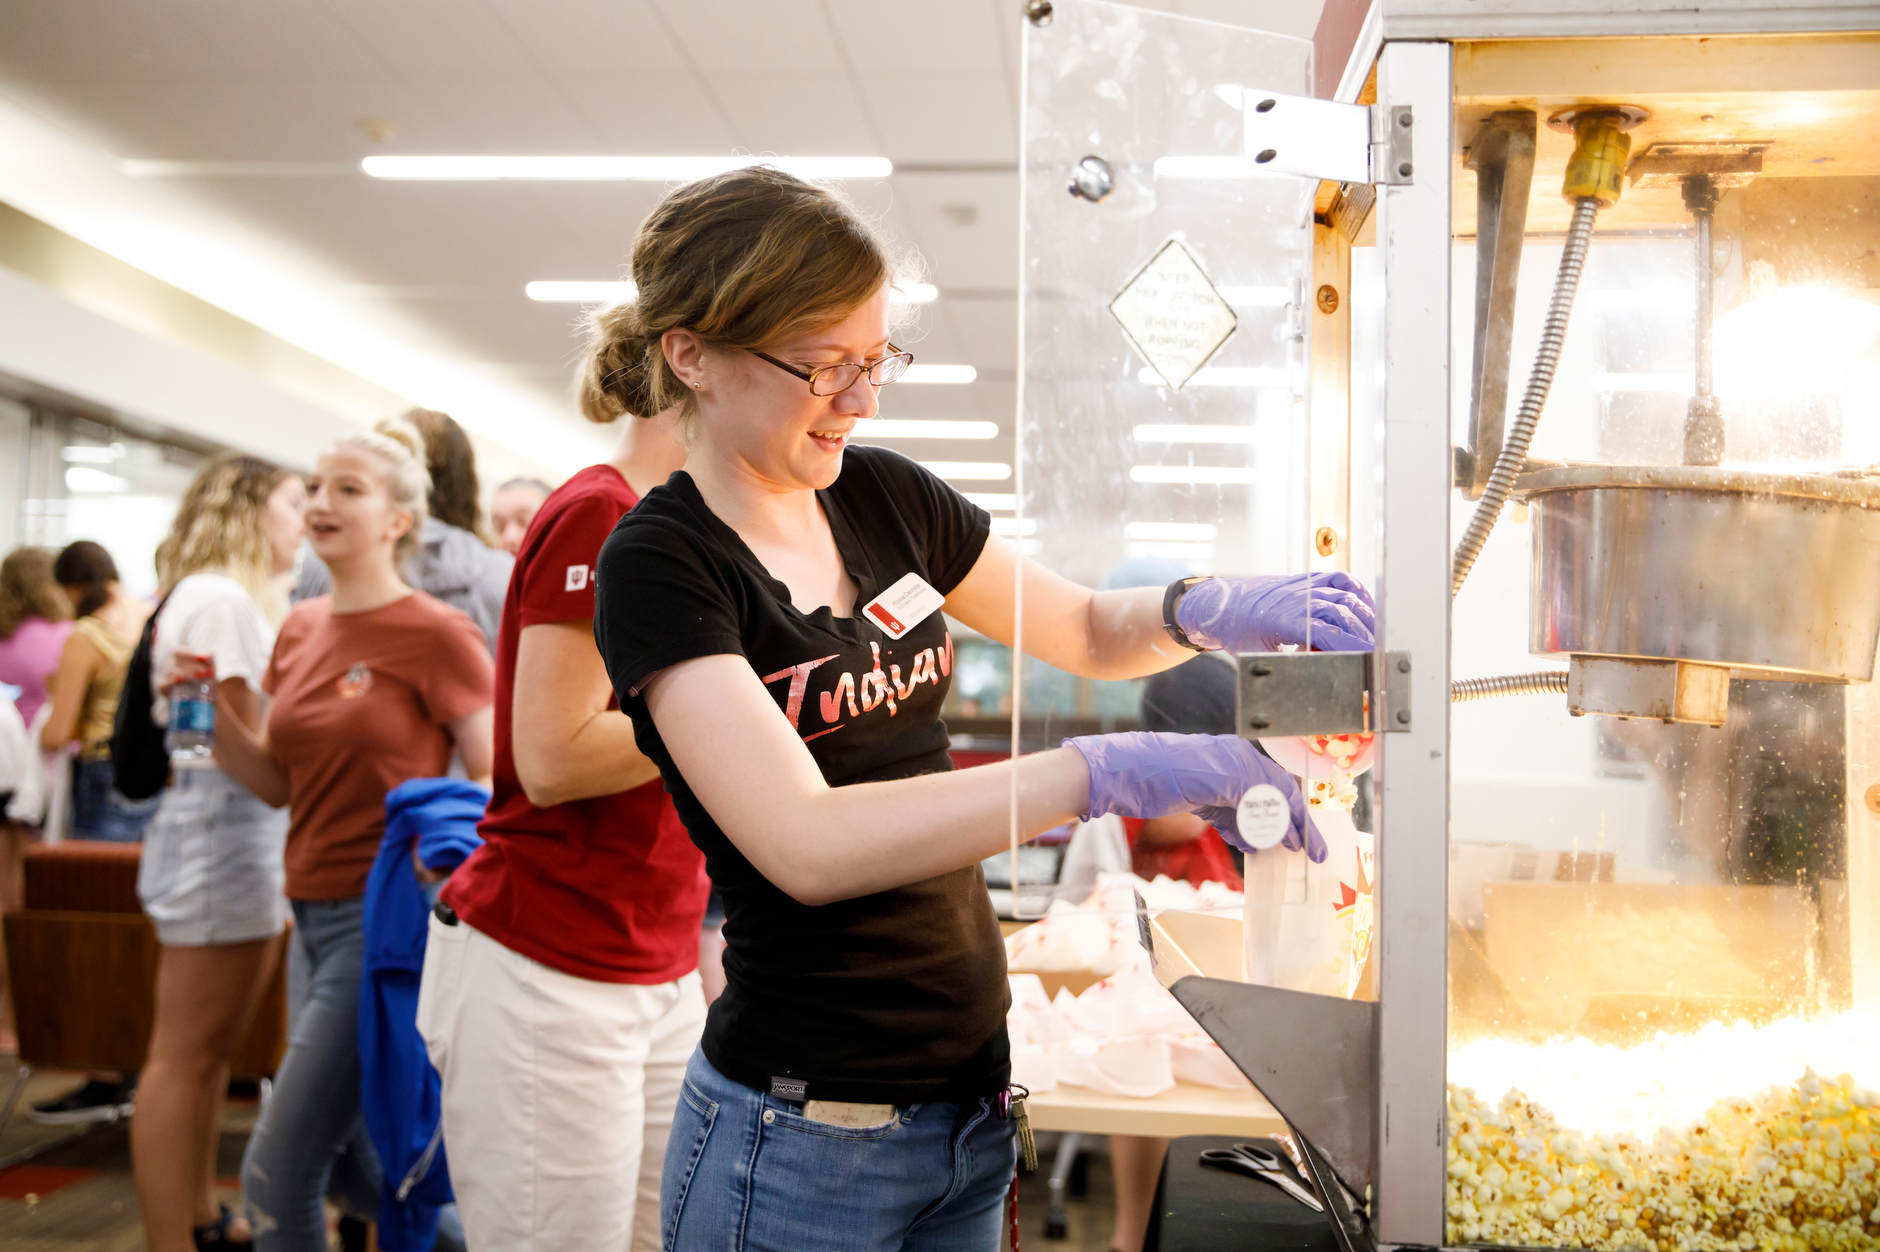 Indiana University Scholars' Commons Librarian Alyssa Denneler scoops popcorn during the Herman B House Party in the Wells Library at IU Bloomington on Thursday, Aug. 22, 2019. (James Brosher/Indiana University)